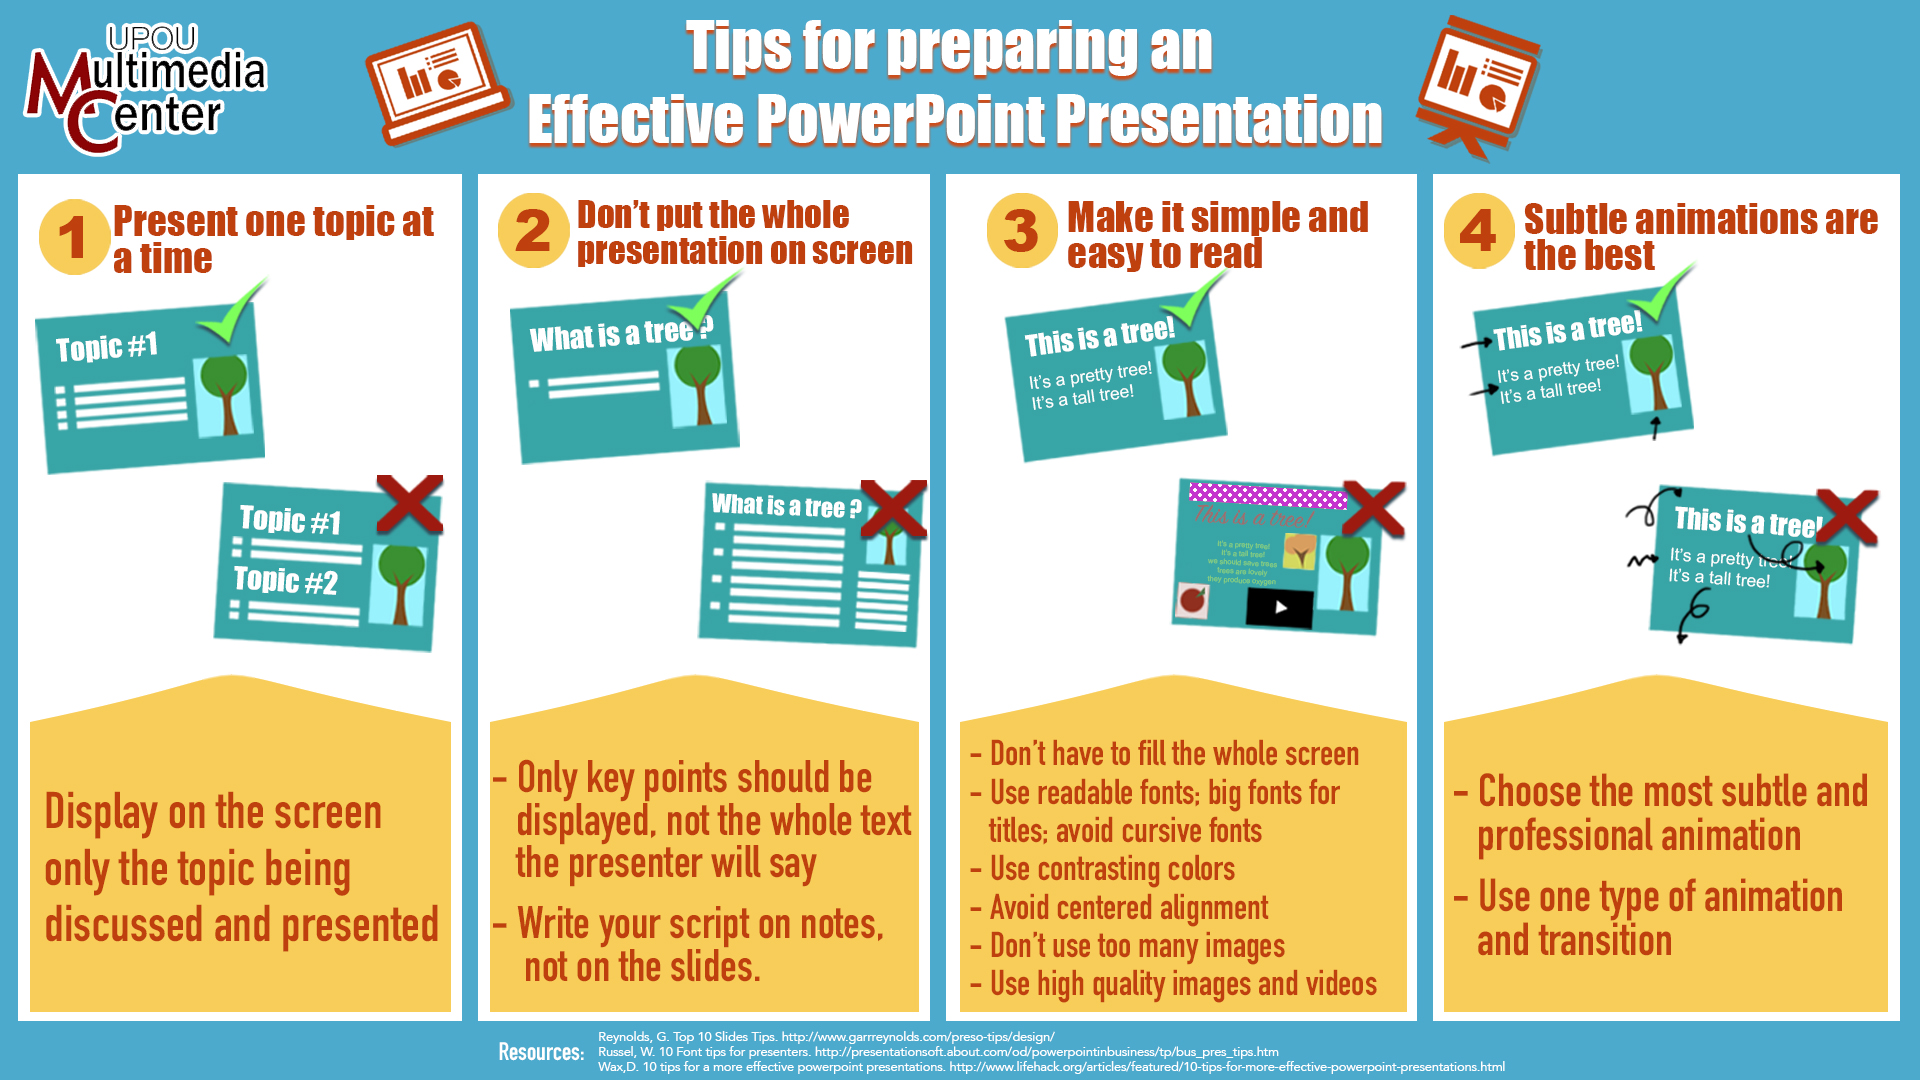 Tips for preparing an effective Powerpoint Presentation